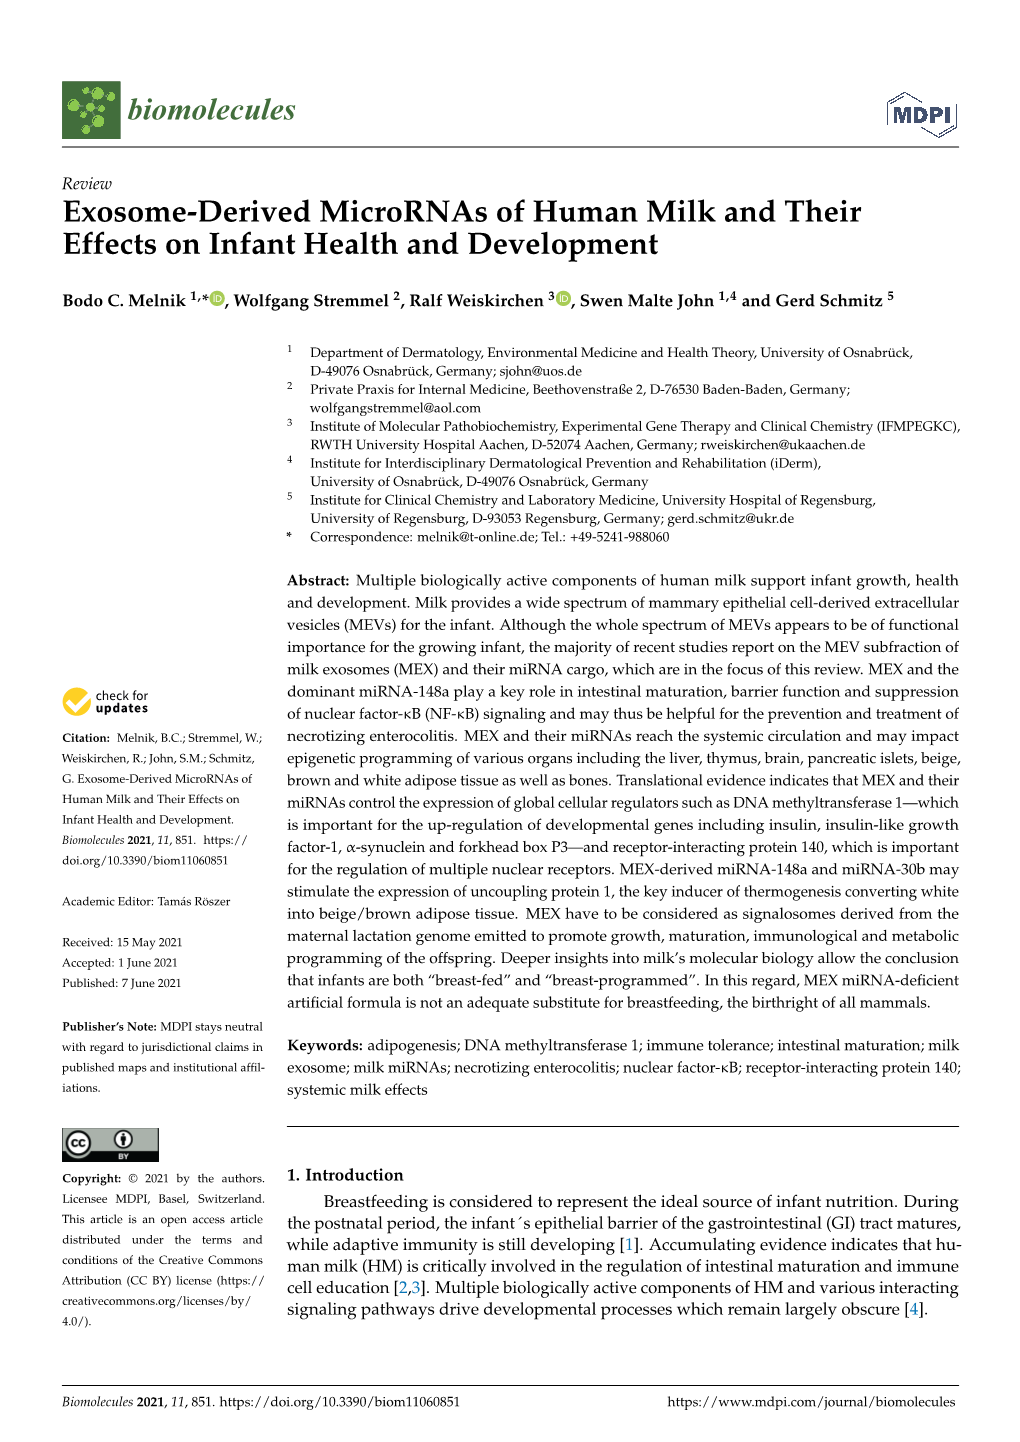 Exosome-Derived Micrornas of Human Milk and Their Effects on Infant Health and Development